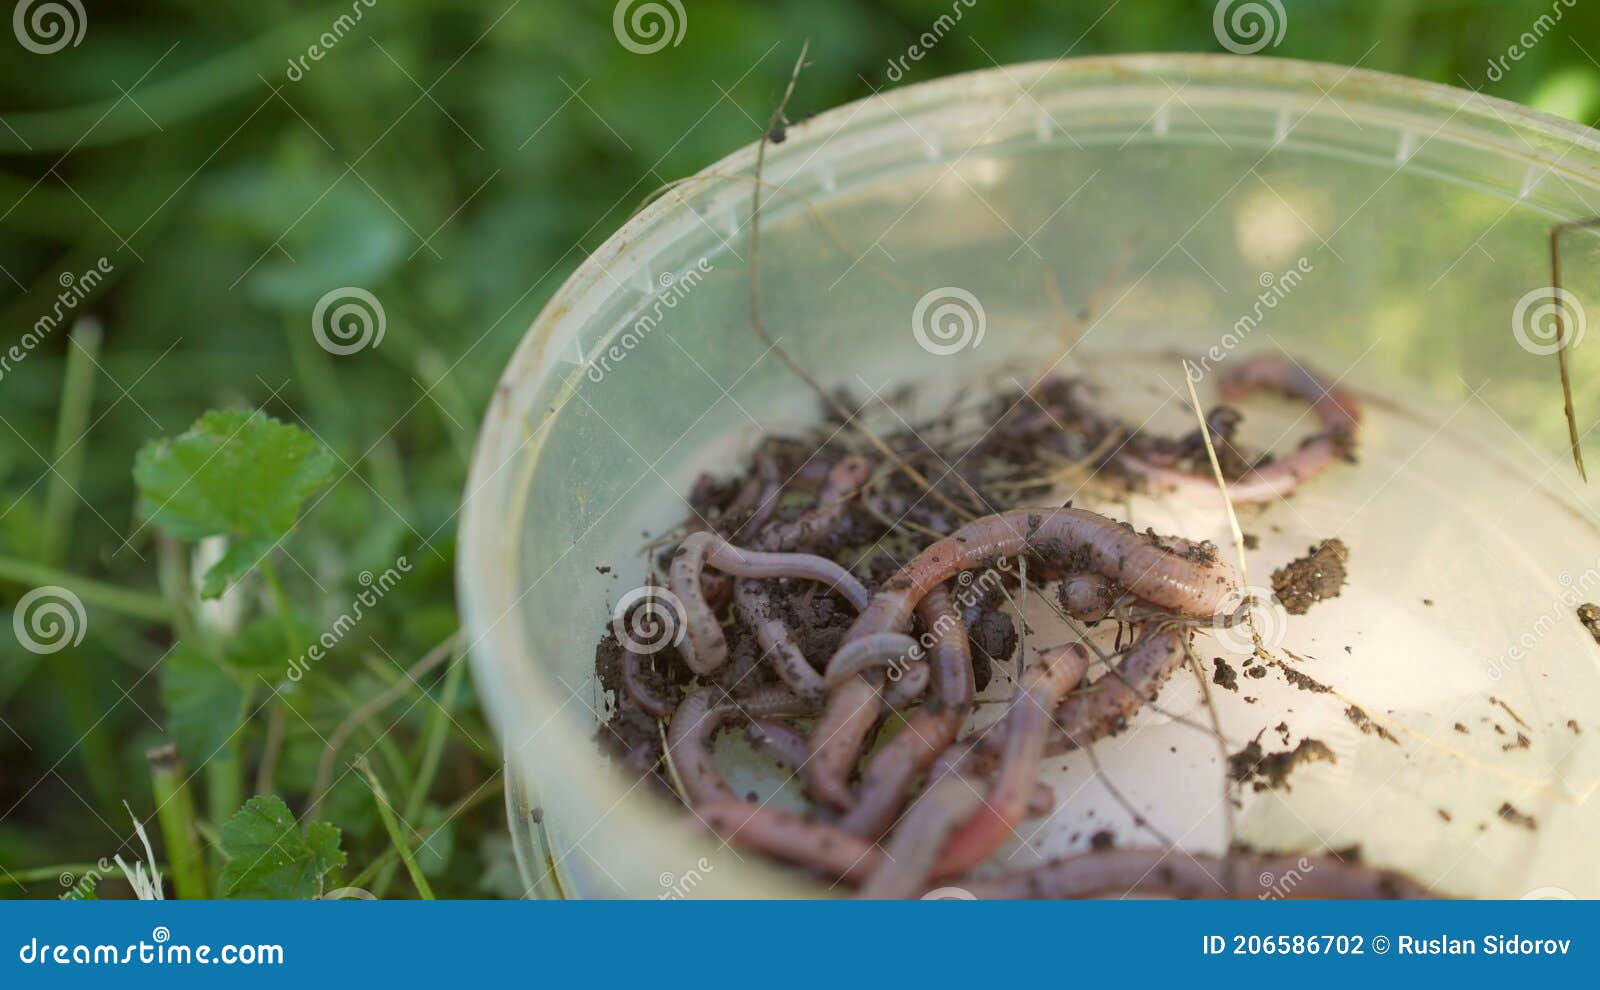 Earthworms in a Jar. Red Worms in a Box in the Manure, Against a Background  of Green Grass. Fishing Worms, Top View Stock Photo - Image of biological,  disgust: 206586702